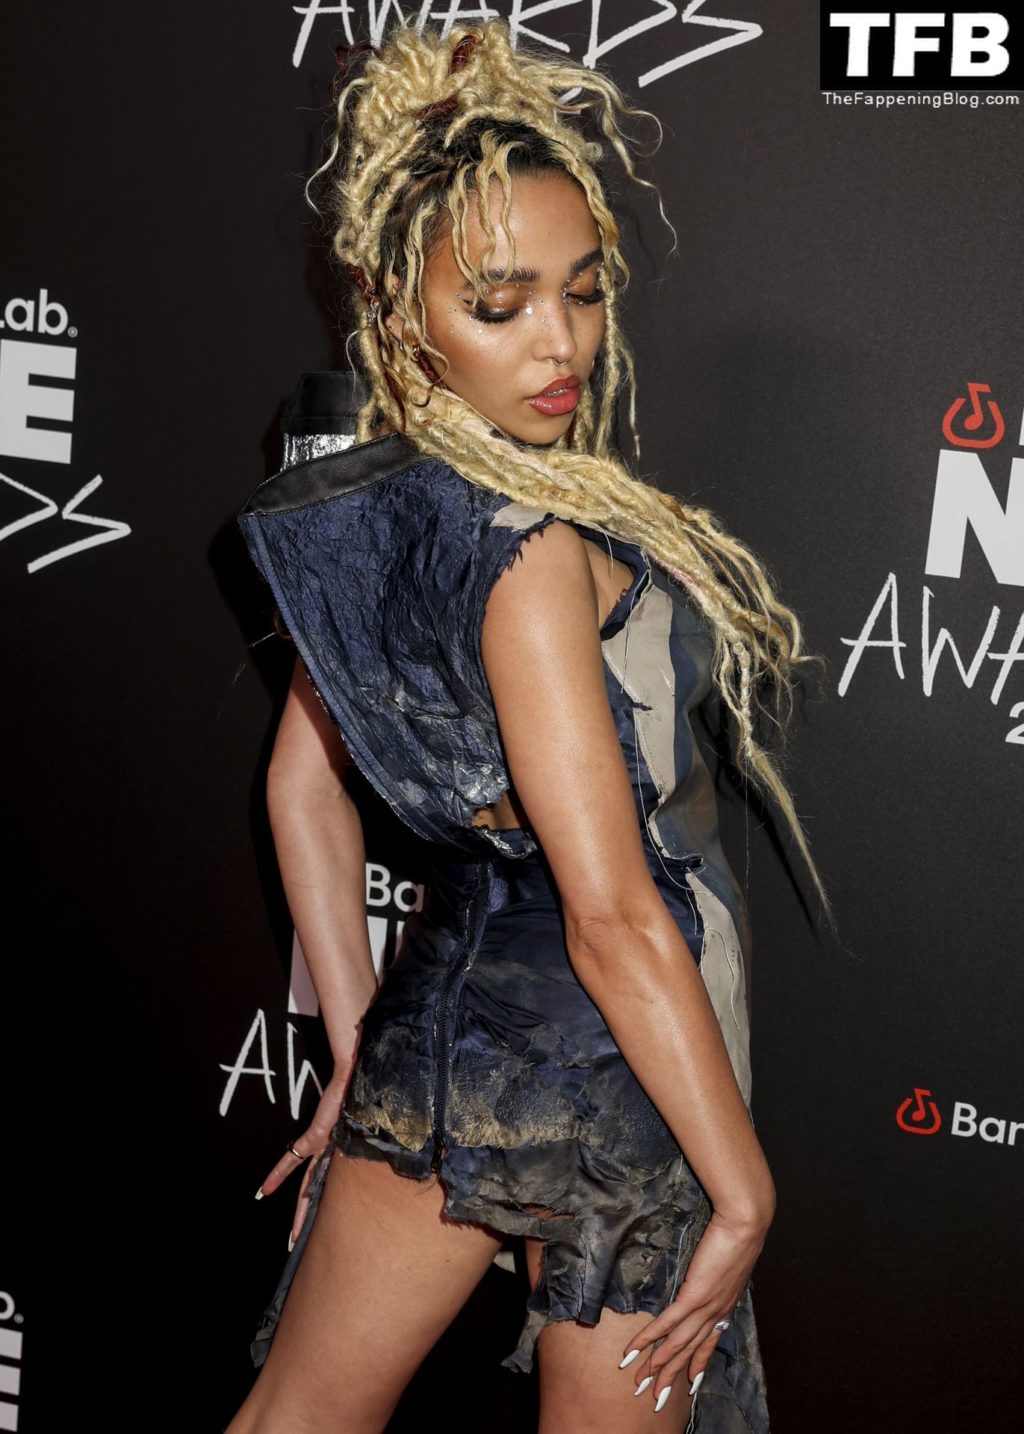 FKA Twigs Nude The Fappening Blog 8 1024x1434 - FKA Twigs Flashes Her Nude Tits & Legs the NME Awards in London (14 Photos)